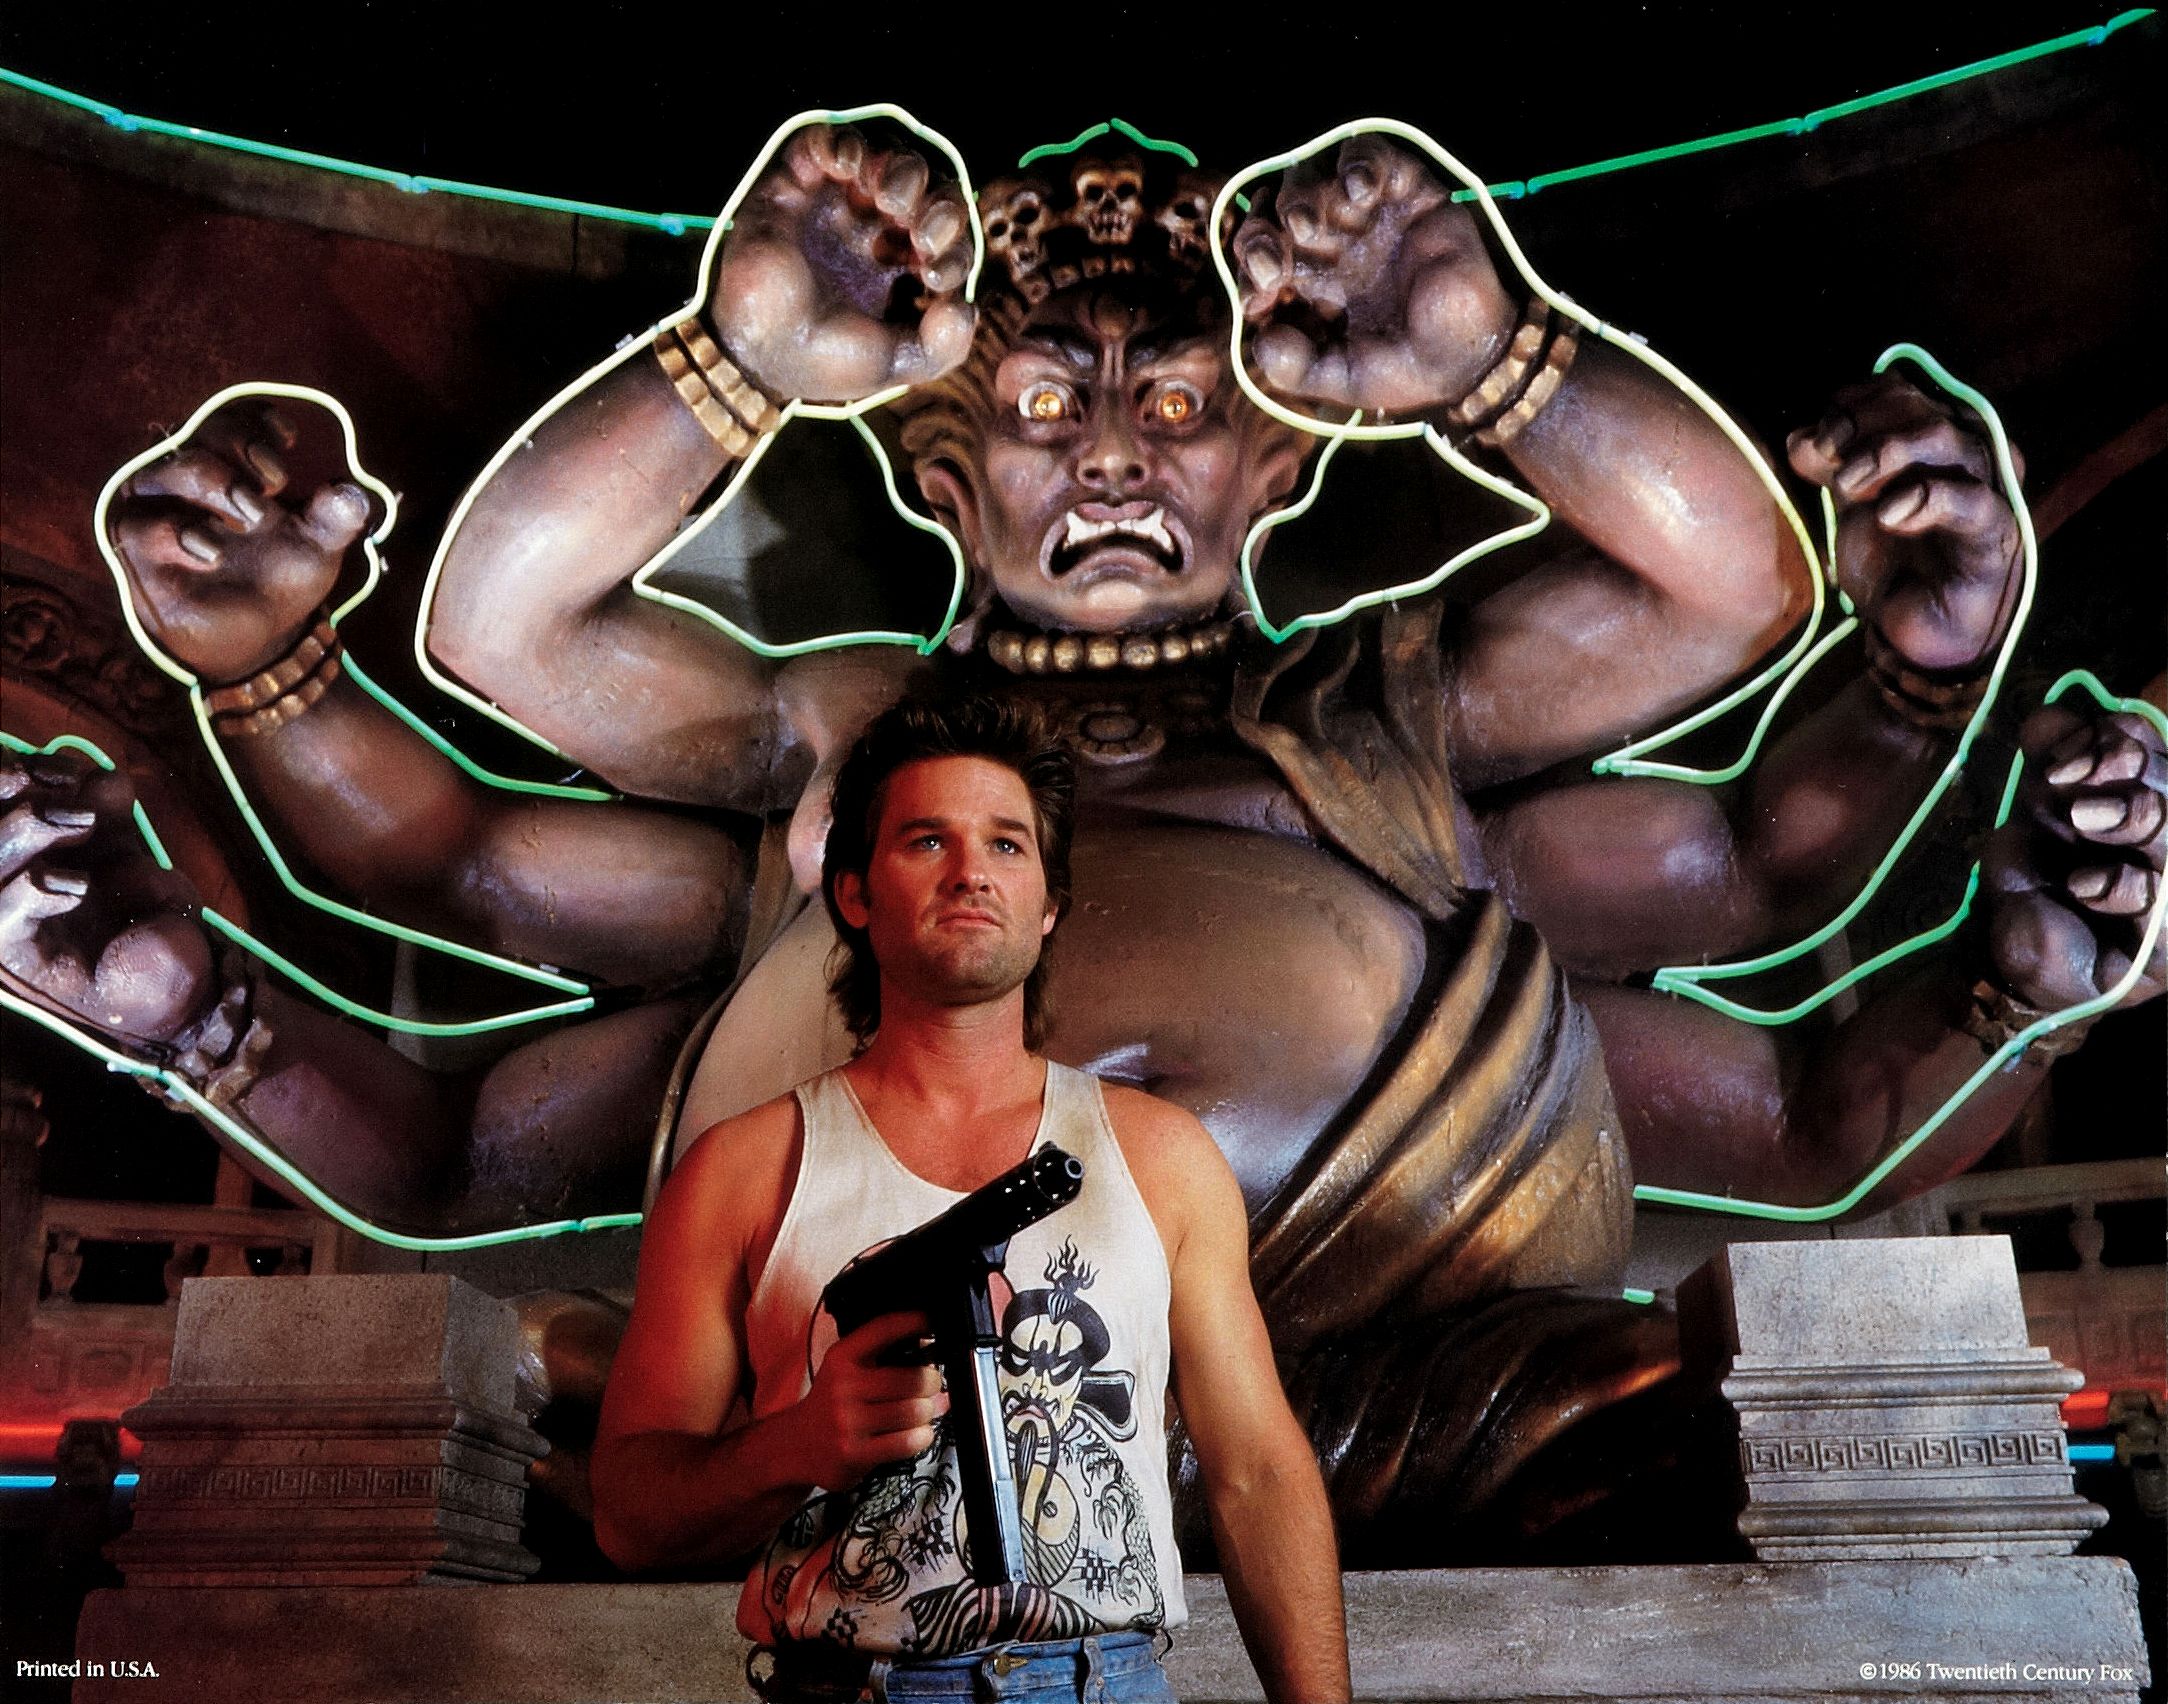 Movie Big Trouble In Little China HD Wallpaper | Background Image